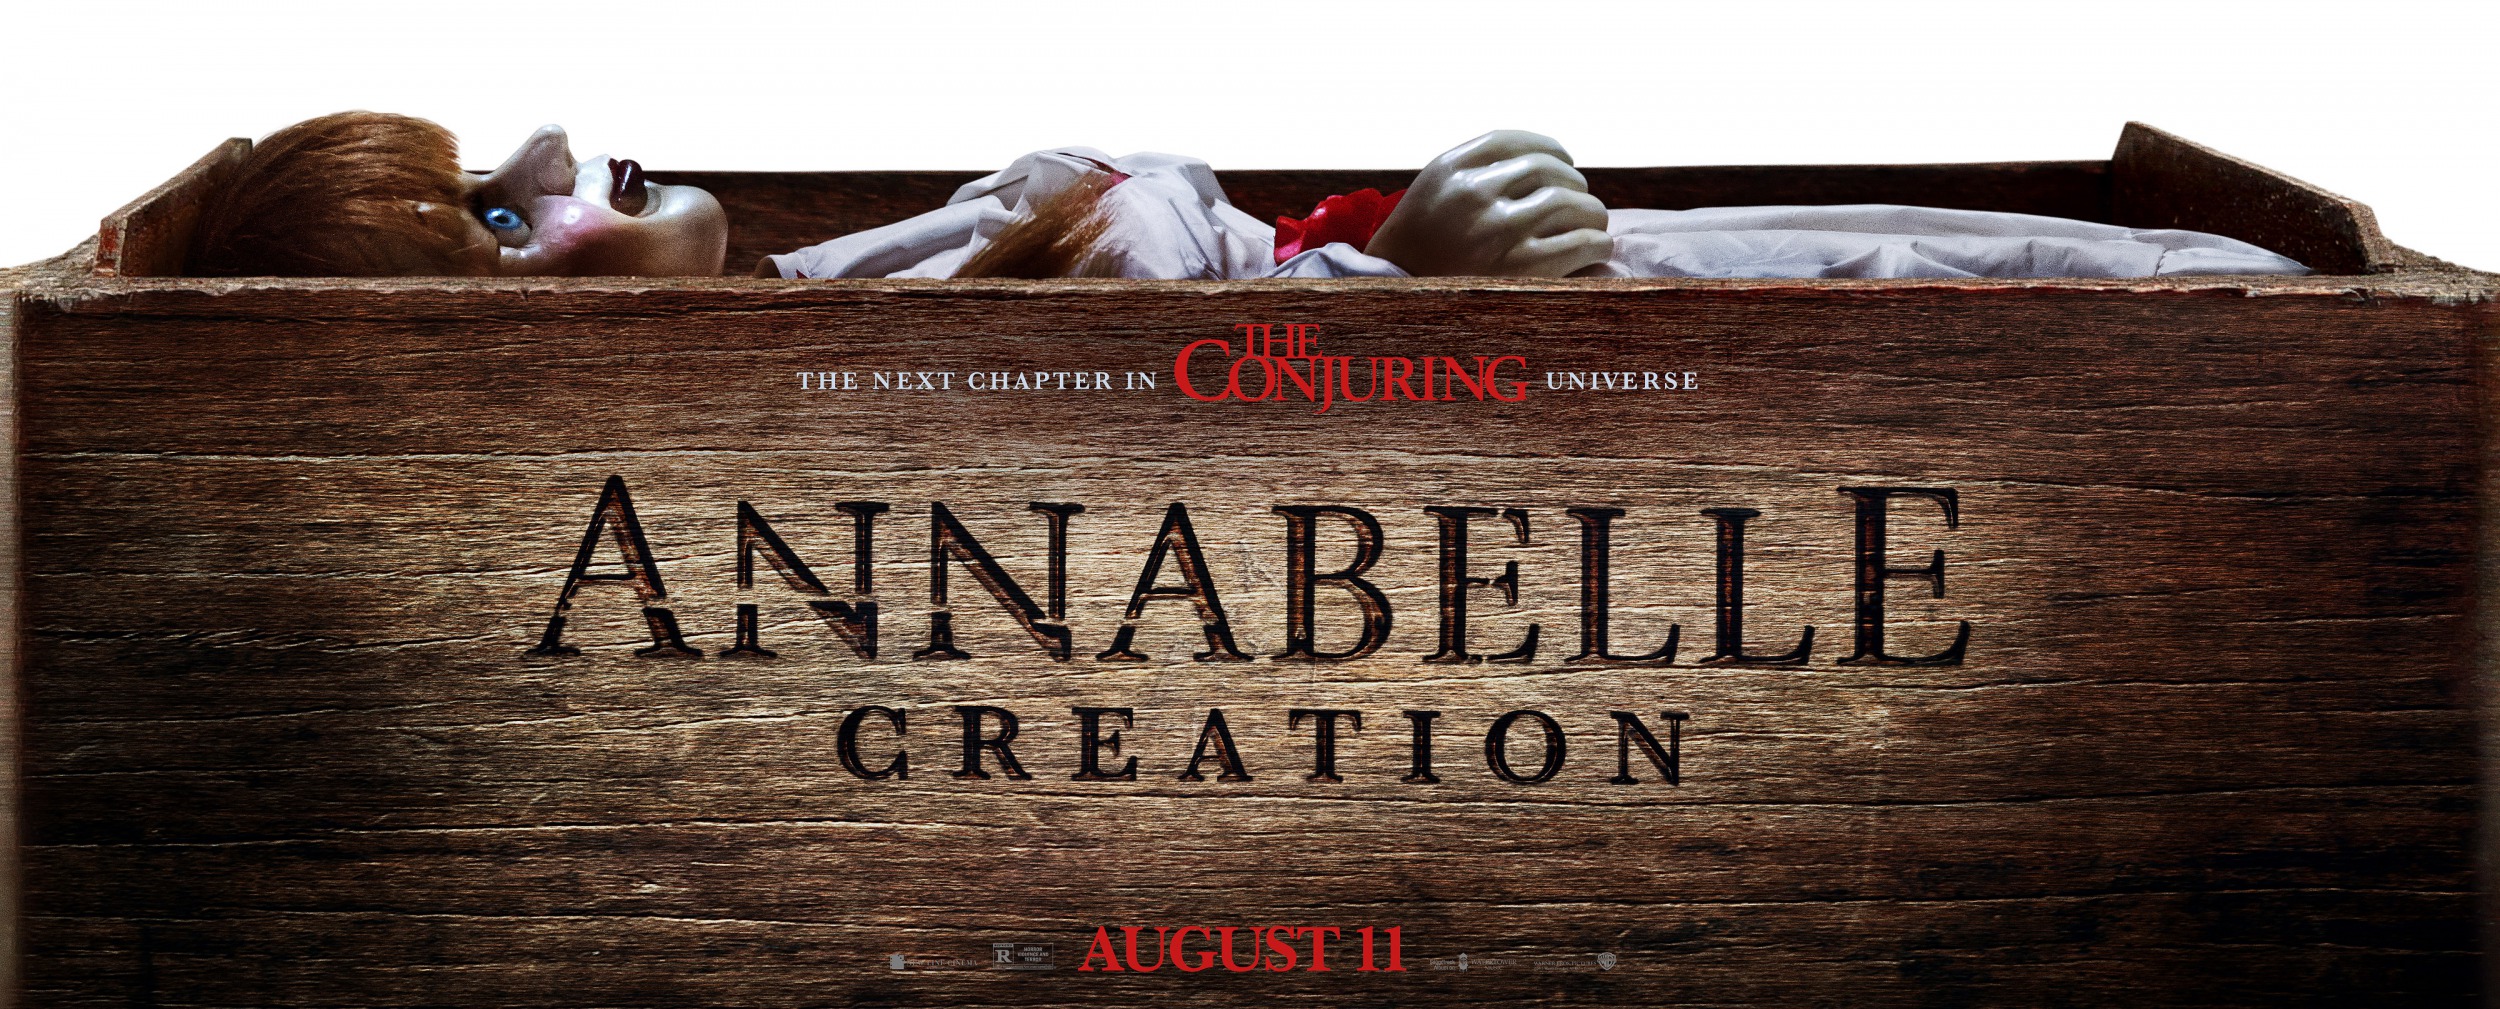 Mega Sized Movie Poster Image for Annabelle: Creation (#4 of 4)